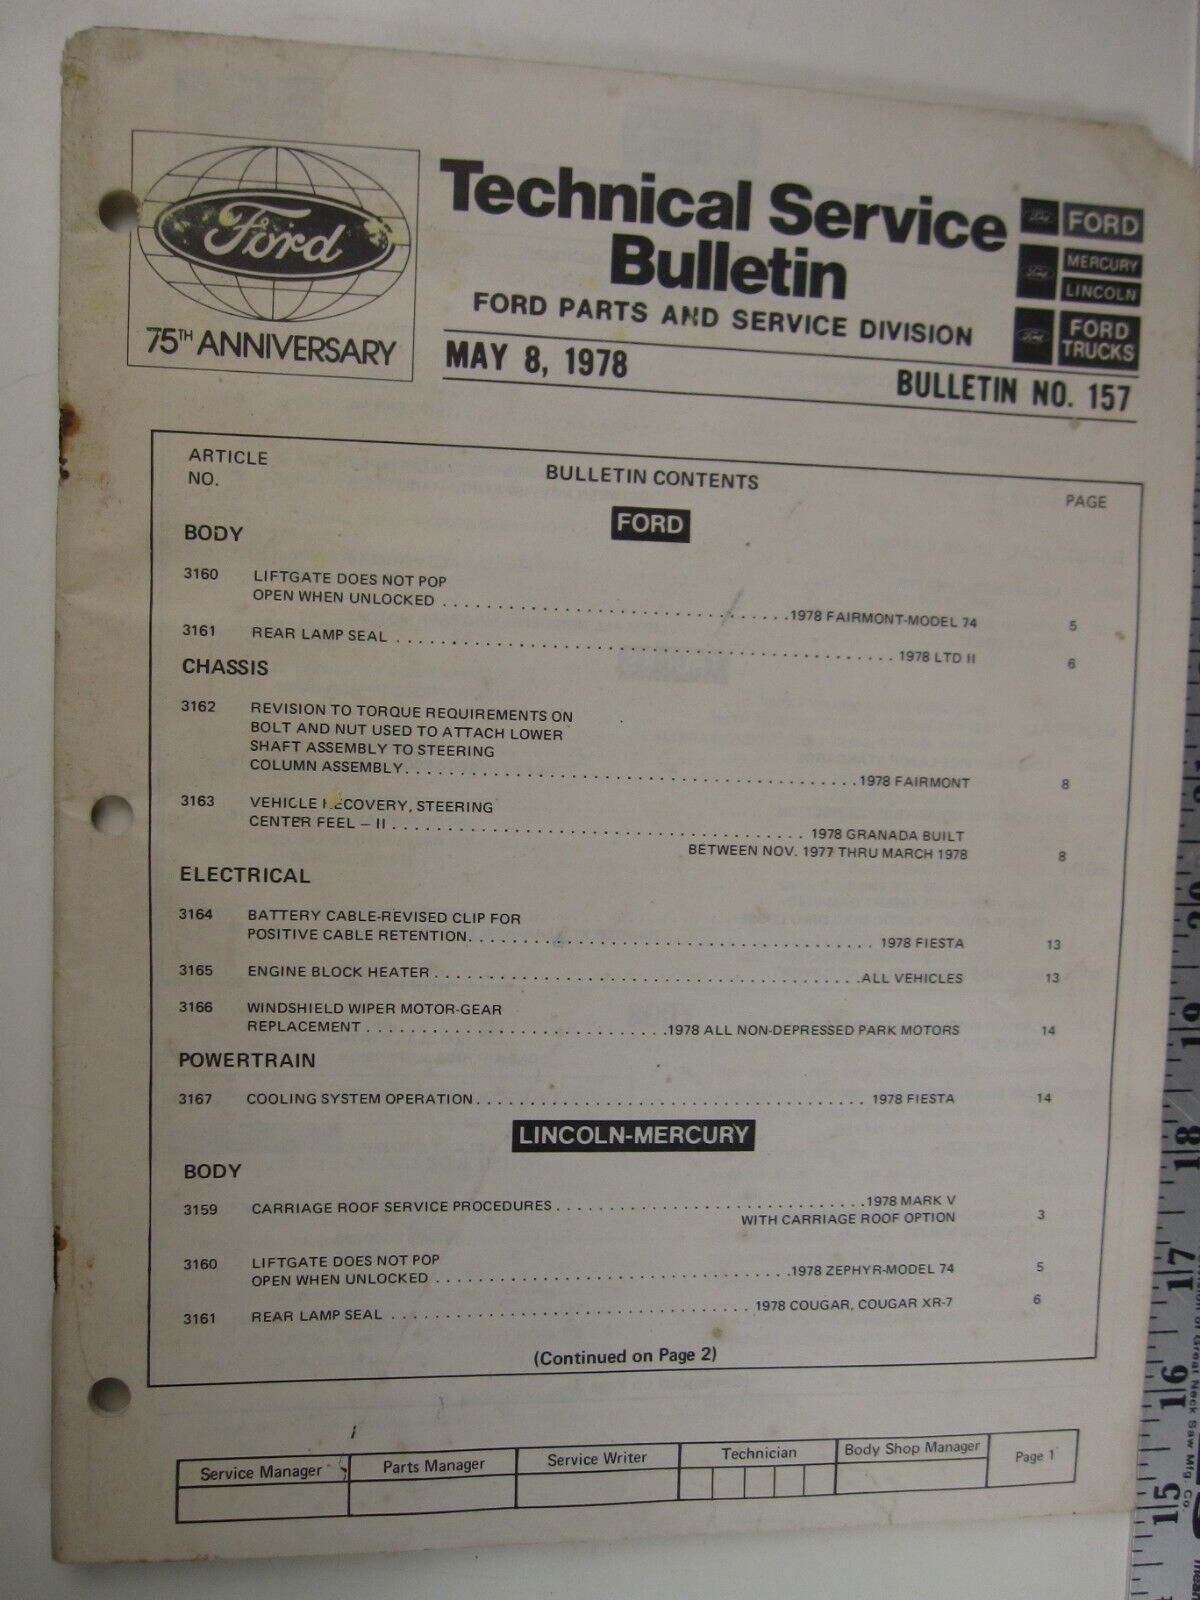 May 8, 1978 FORD Technical Service Bulletin Number 157  BIS